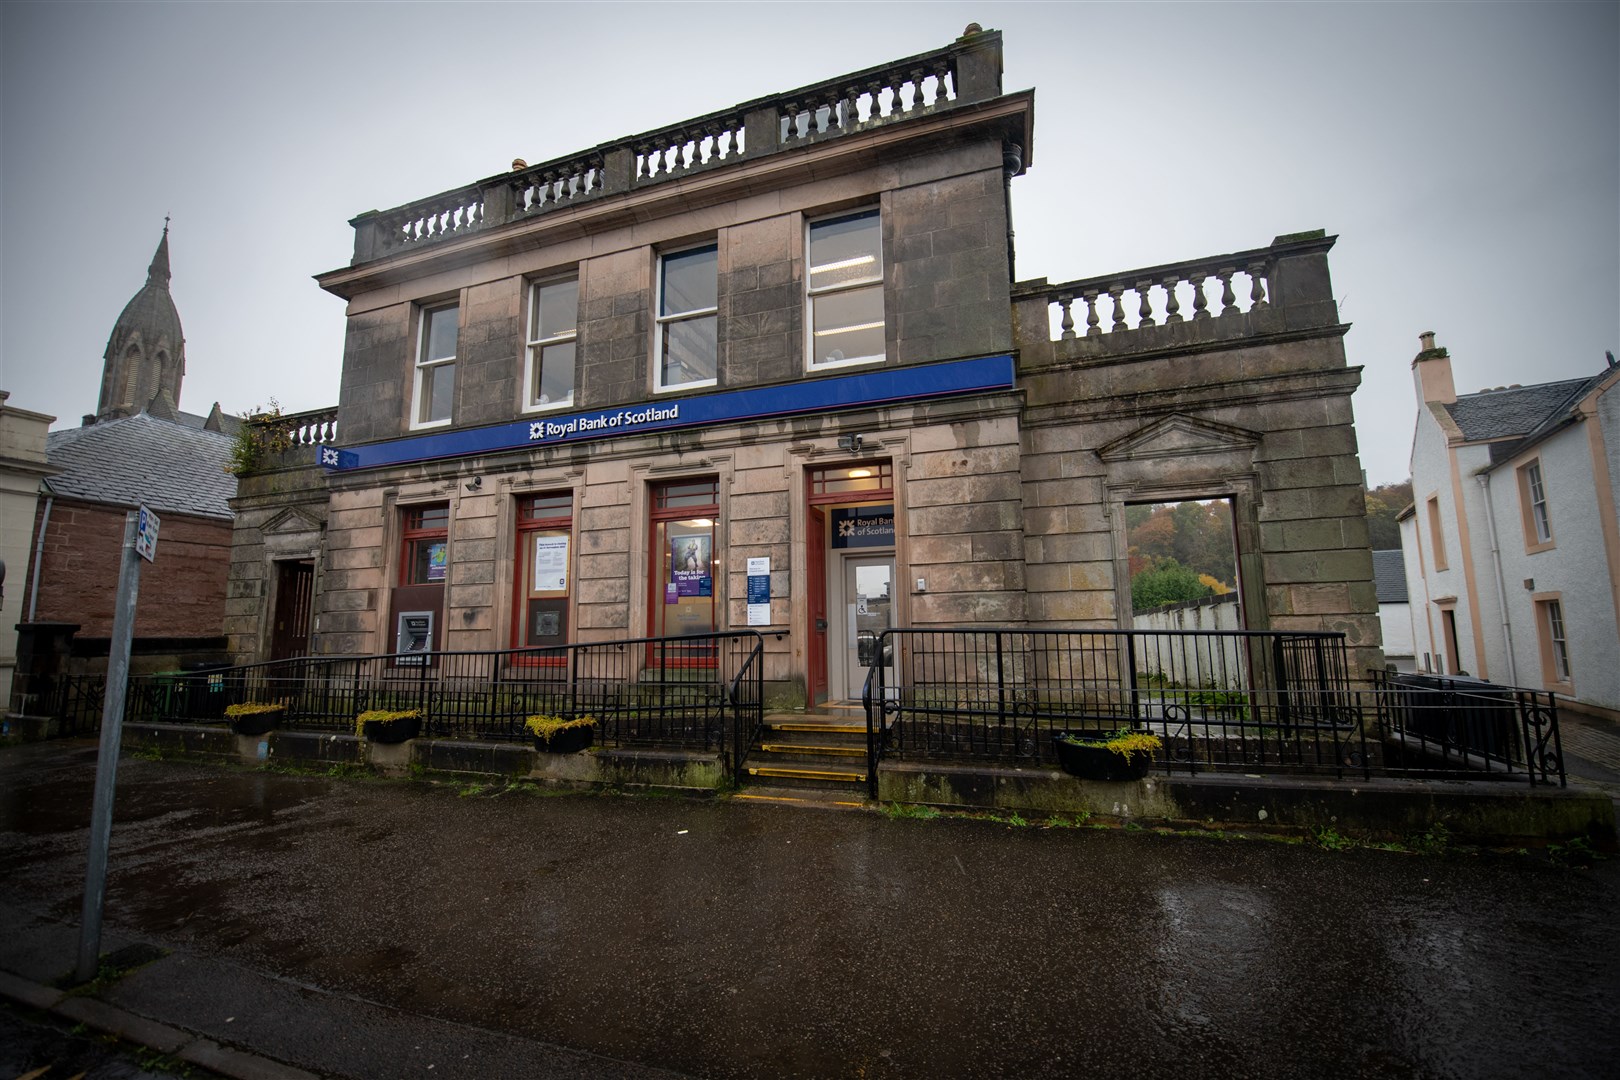 The Royal Bank of Scotland in Dingwall is now closed.